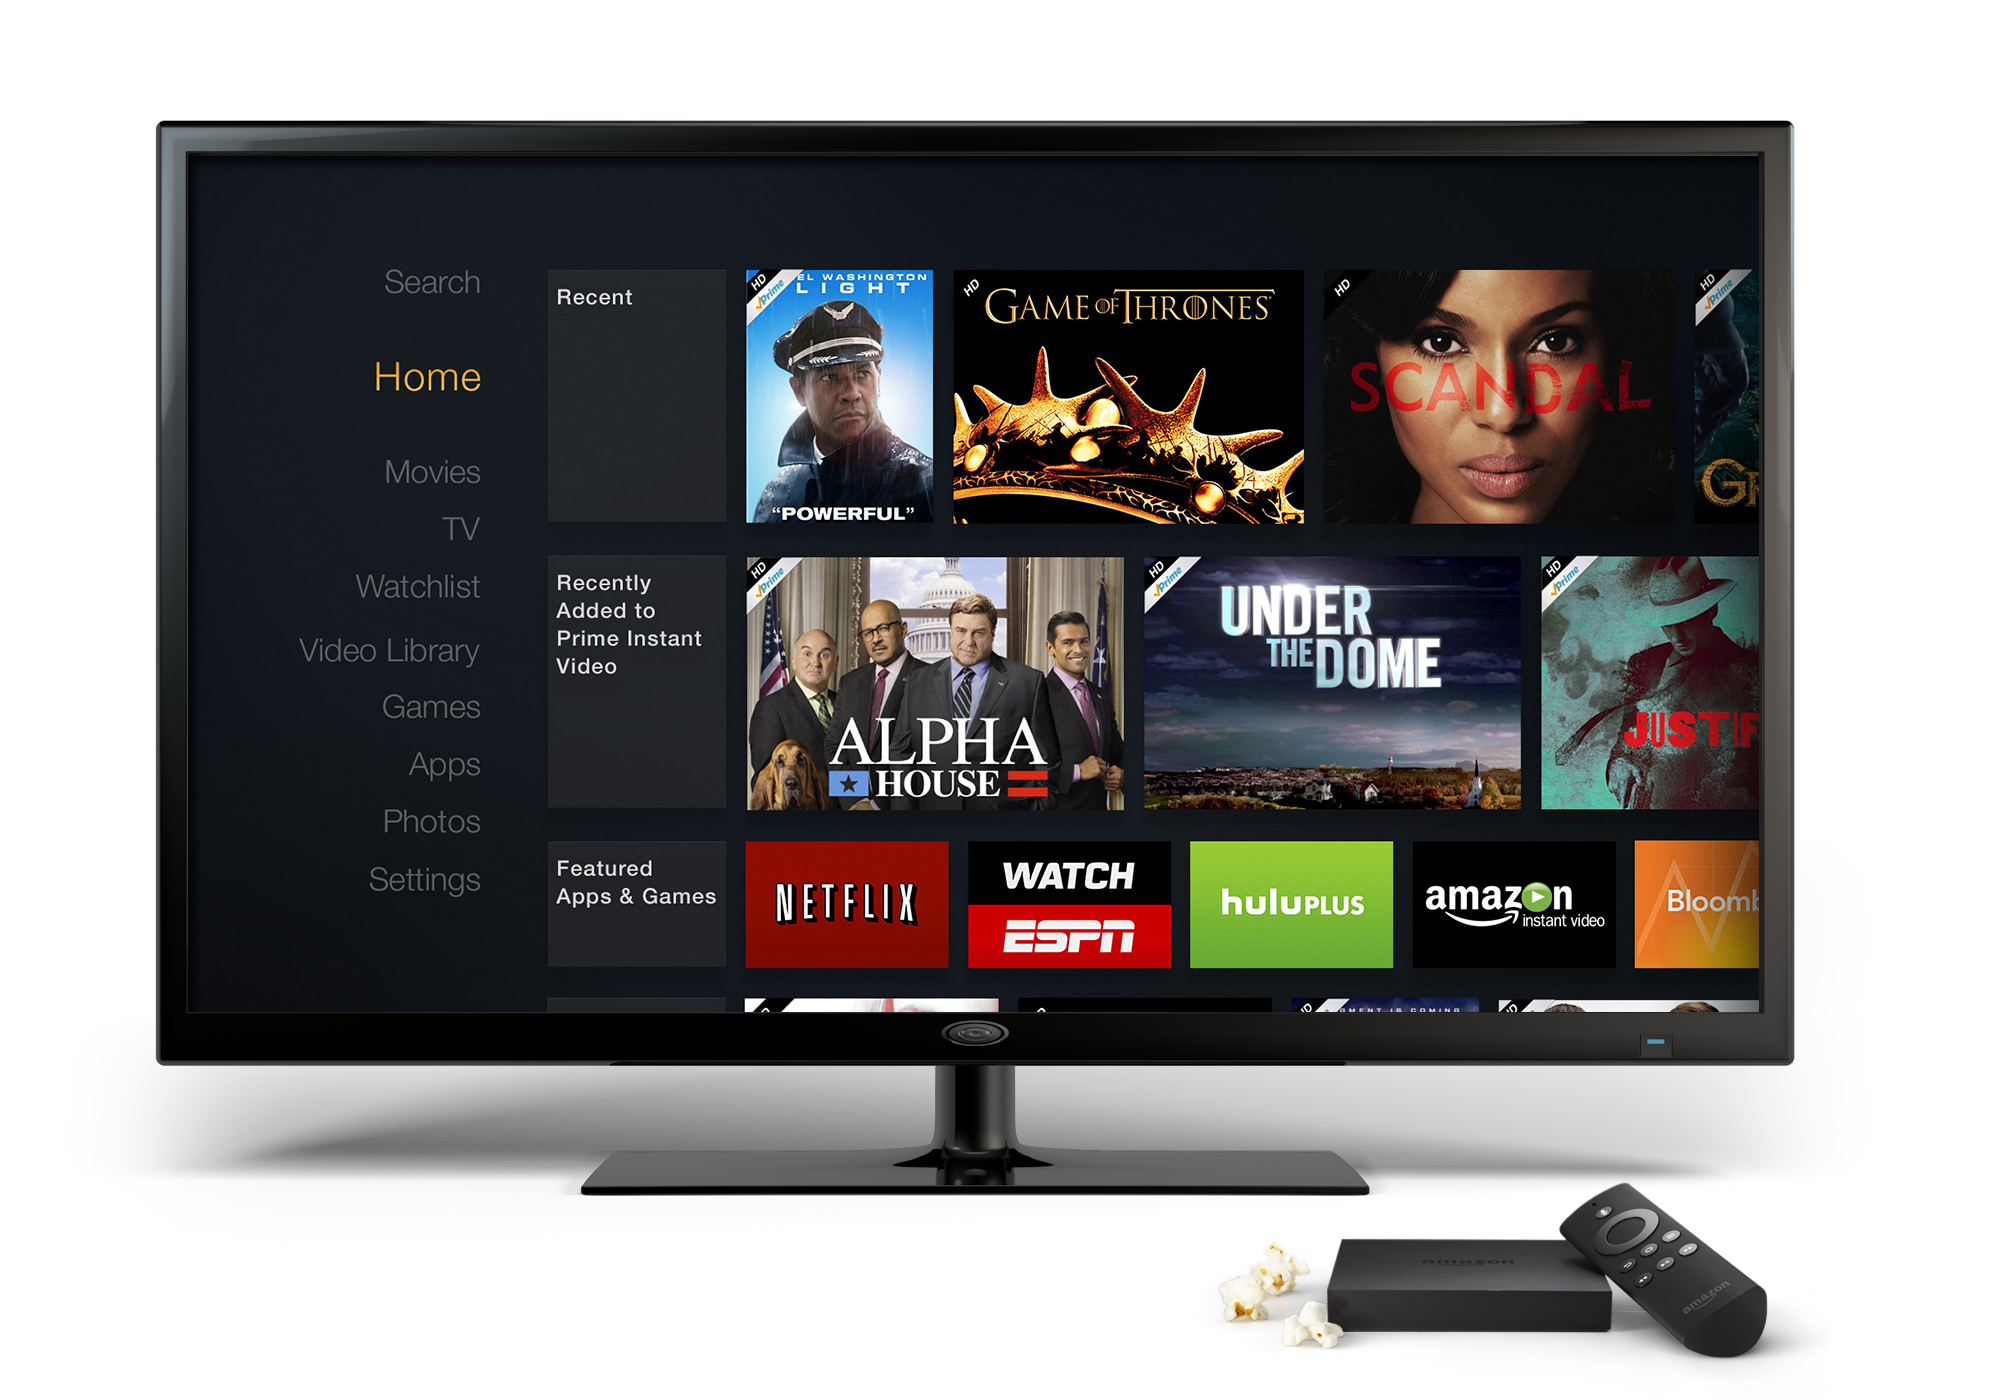 New Android Streaming Boxes Access Nextflix, Hulu, Amazon